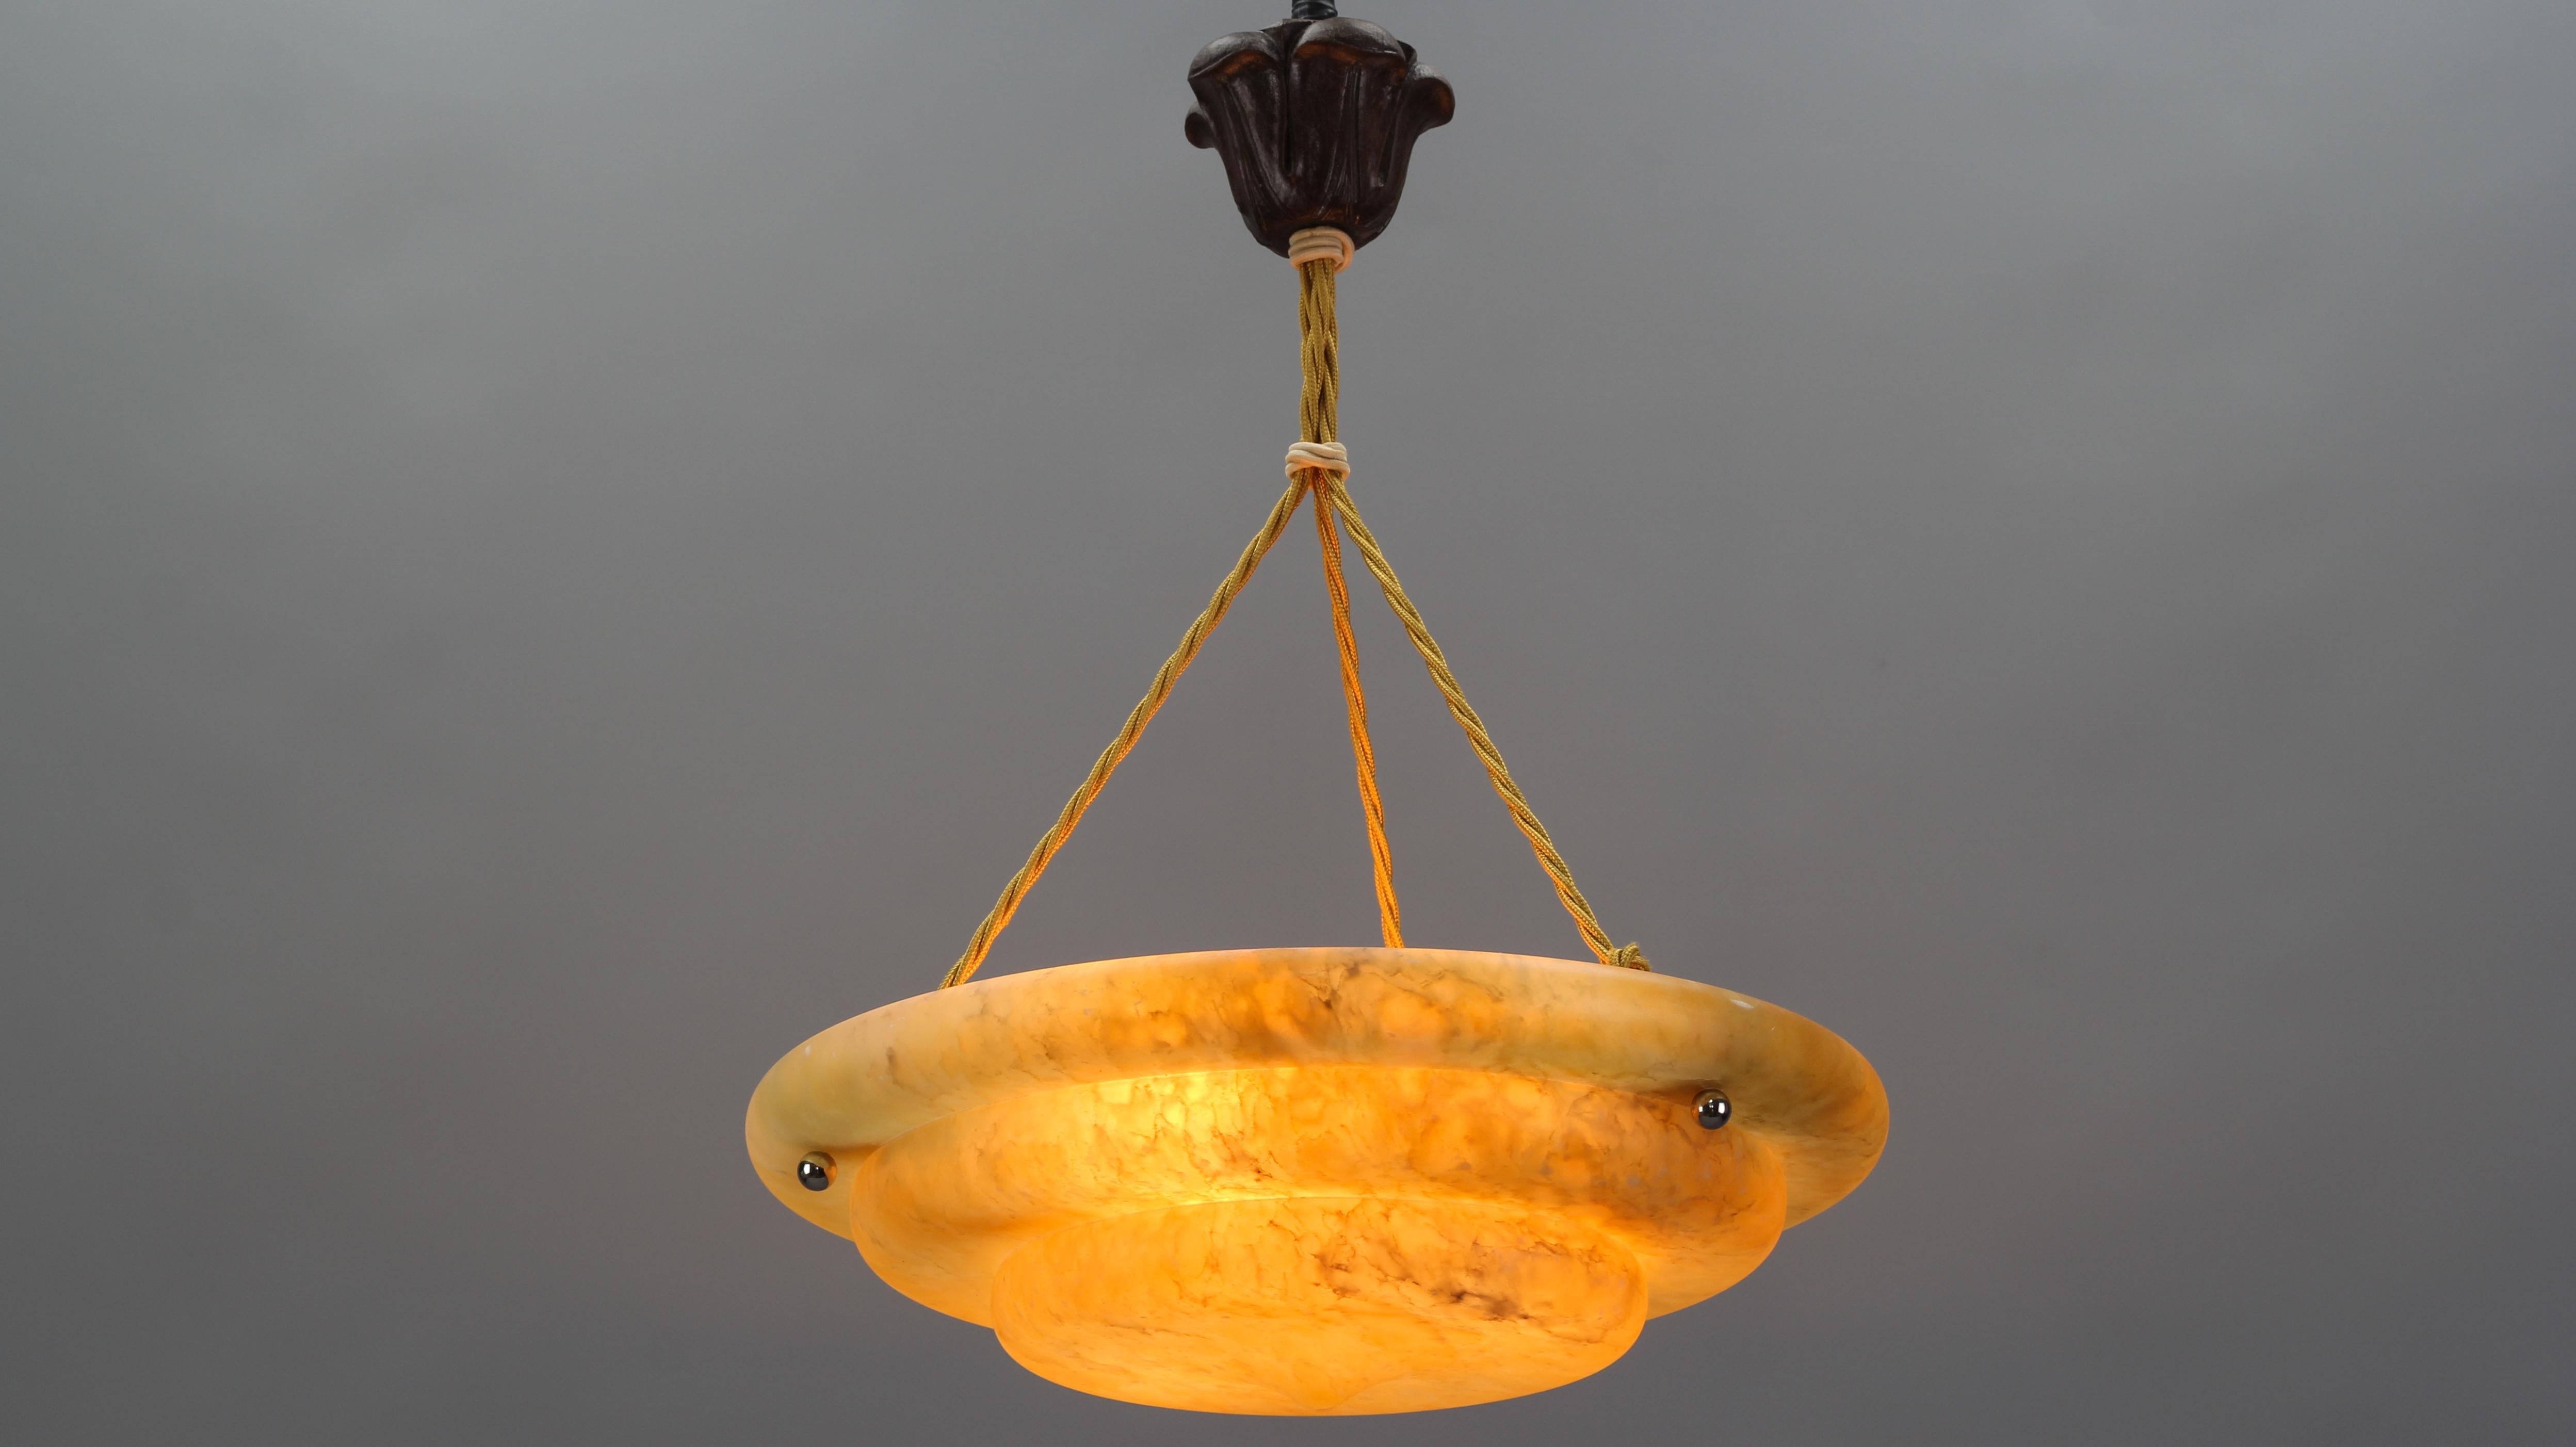 Beautifully shaped French Art Deco style alabaster pendant ceiling light fixture in warm amber color. The masterfully carved one-piece alabaster bowl is suspended by three ropes and a wooden ceiling rose. The light shining through the stone with